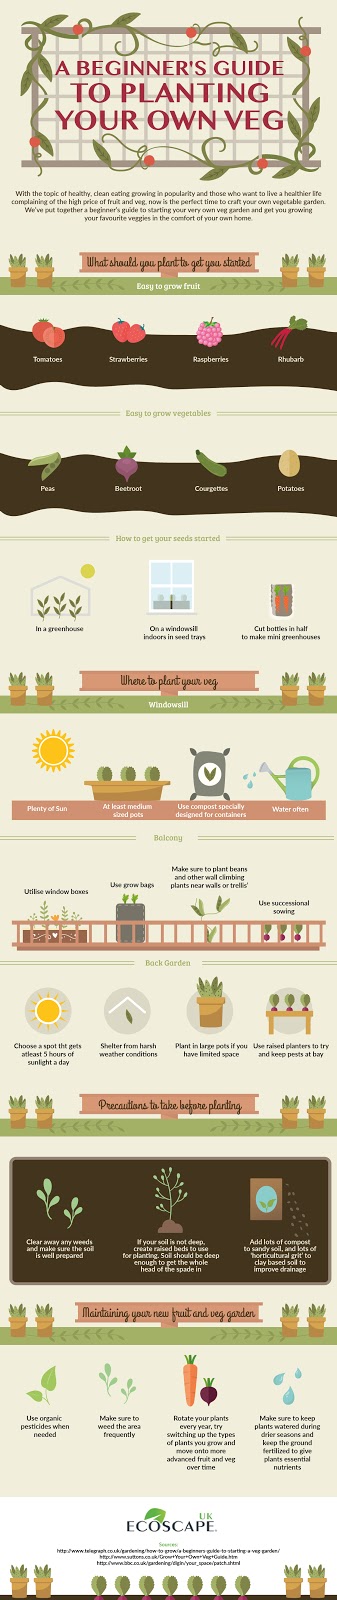 , A Beginners Guide to Growing Your Own Veg